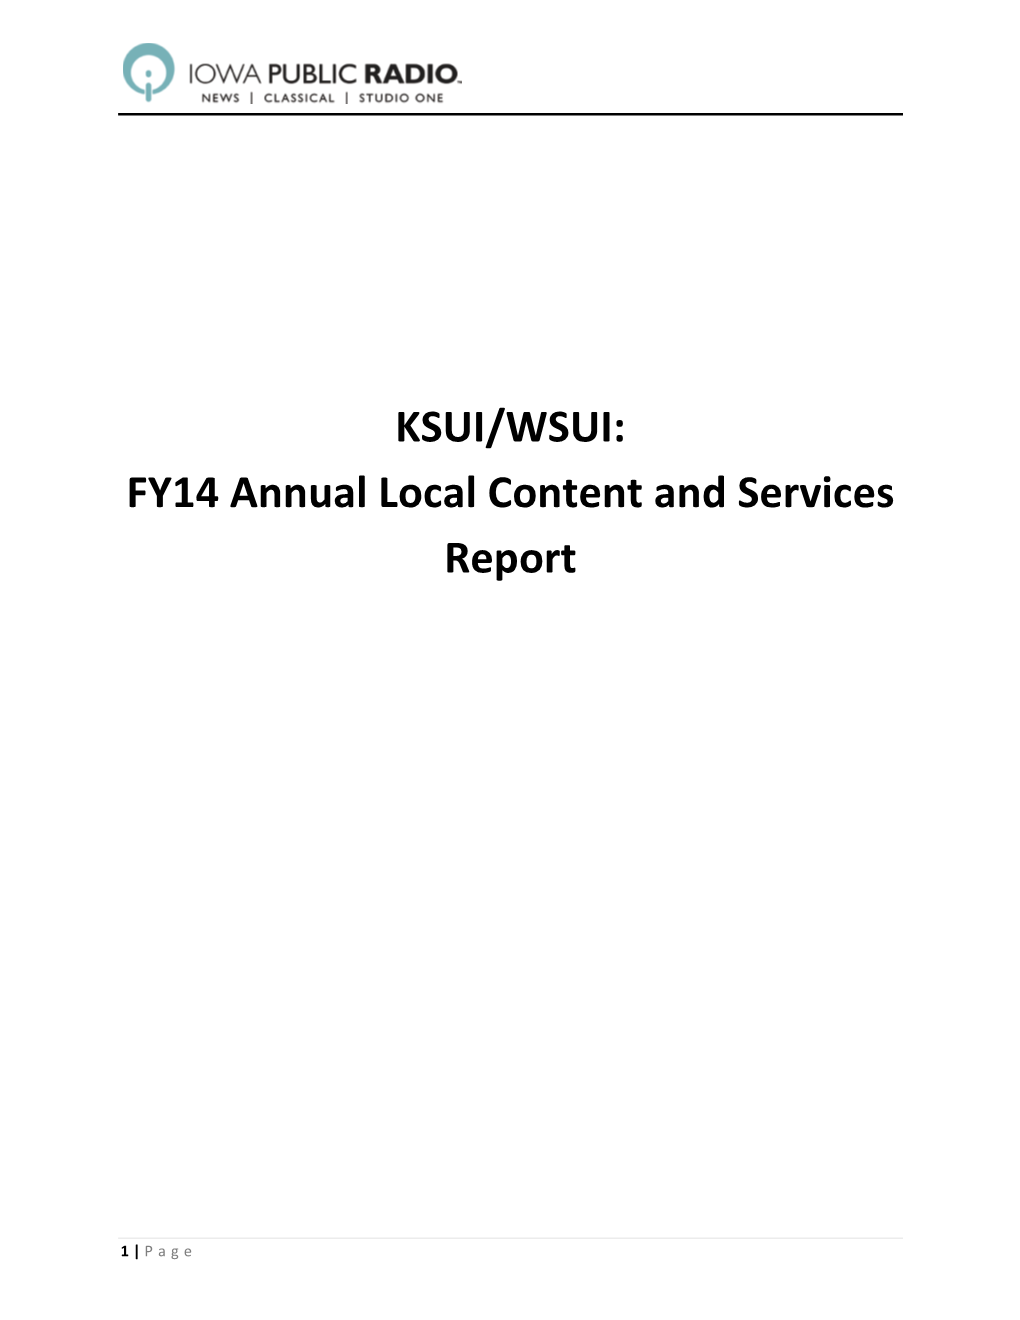 KSUI/WSUI: FY14 Annual Local Content and Services Report